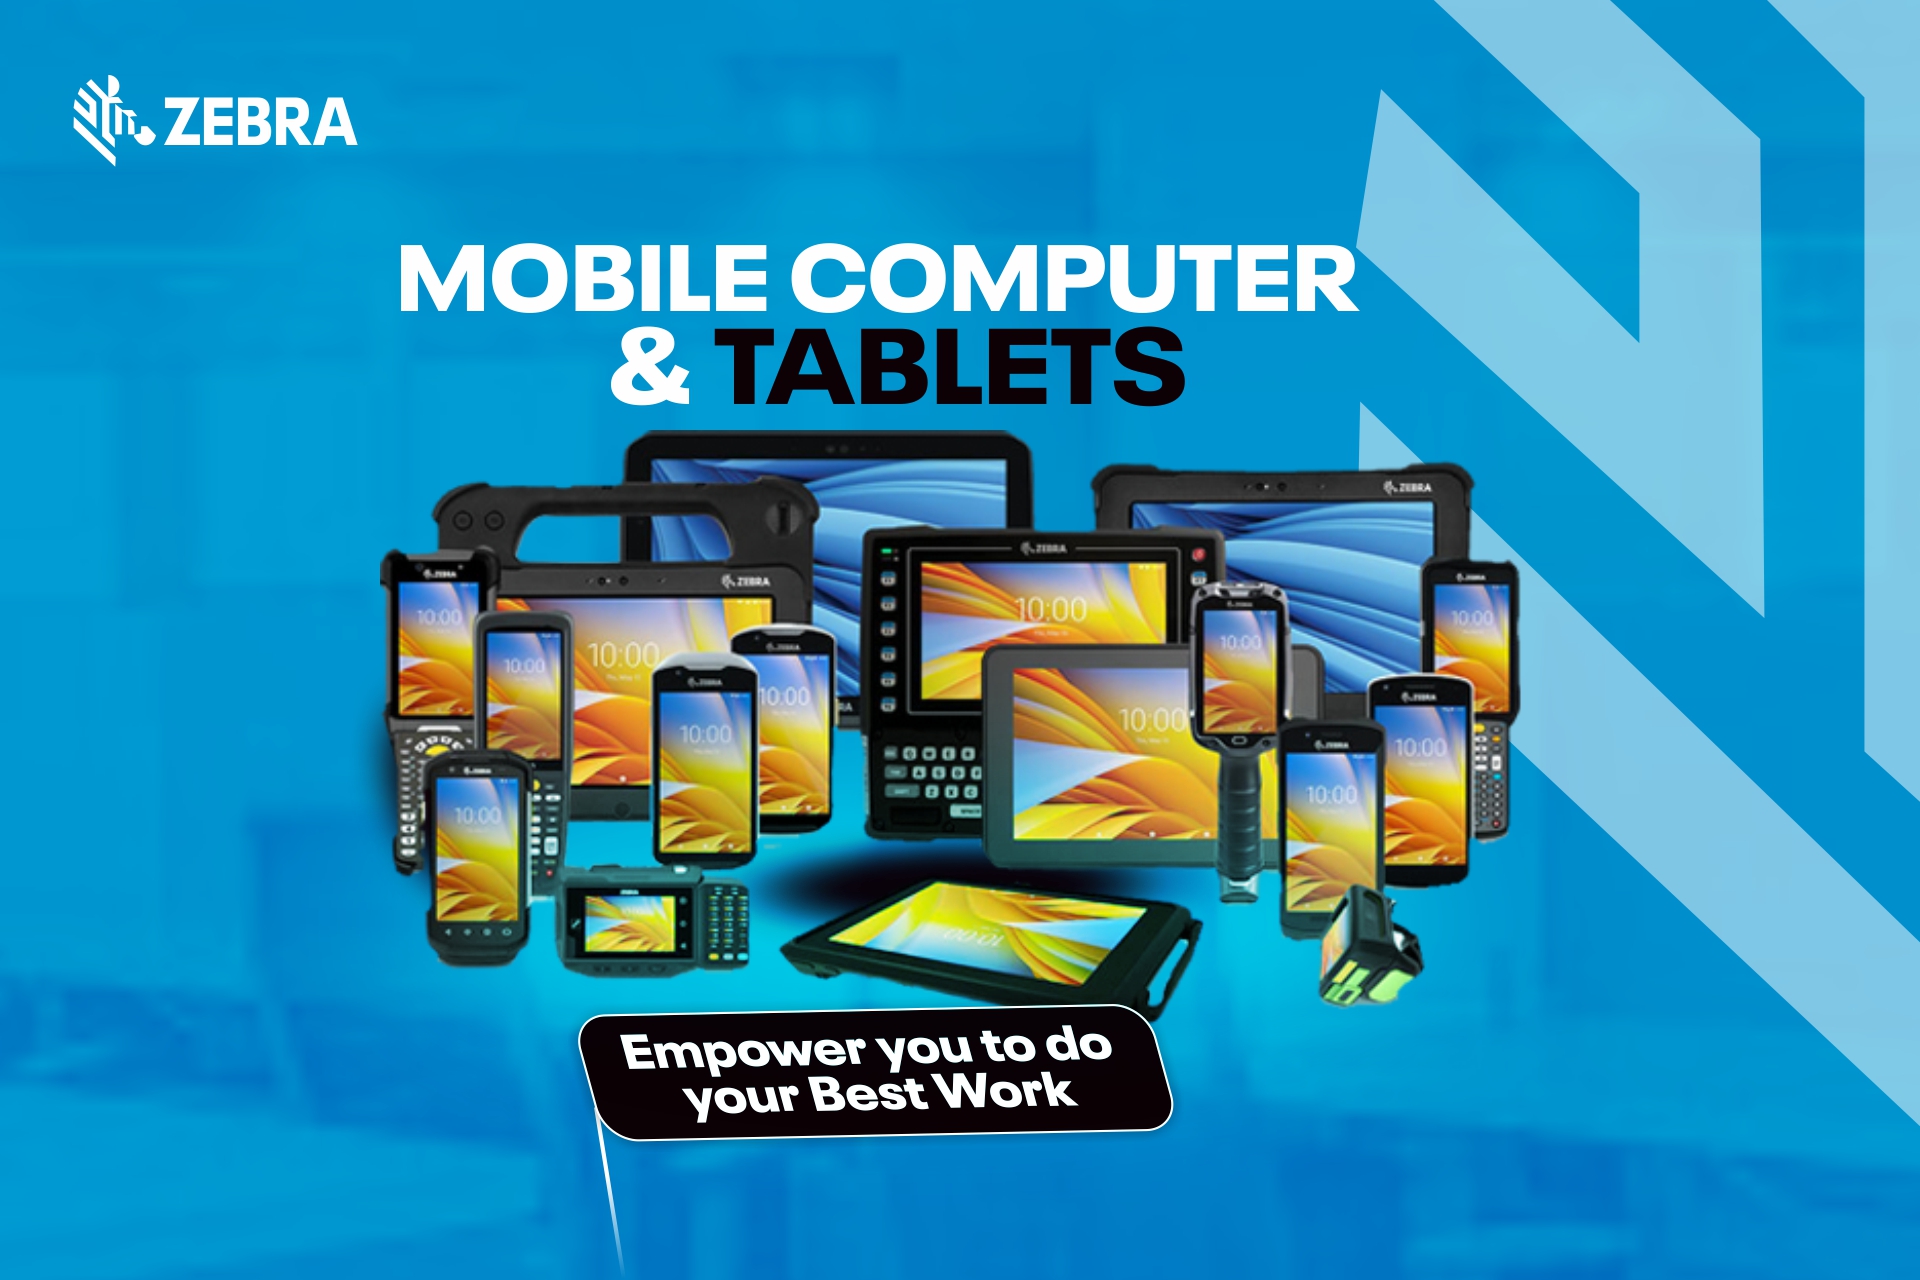 Zebra Mobile computer & Tablets Products in Nigeria